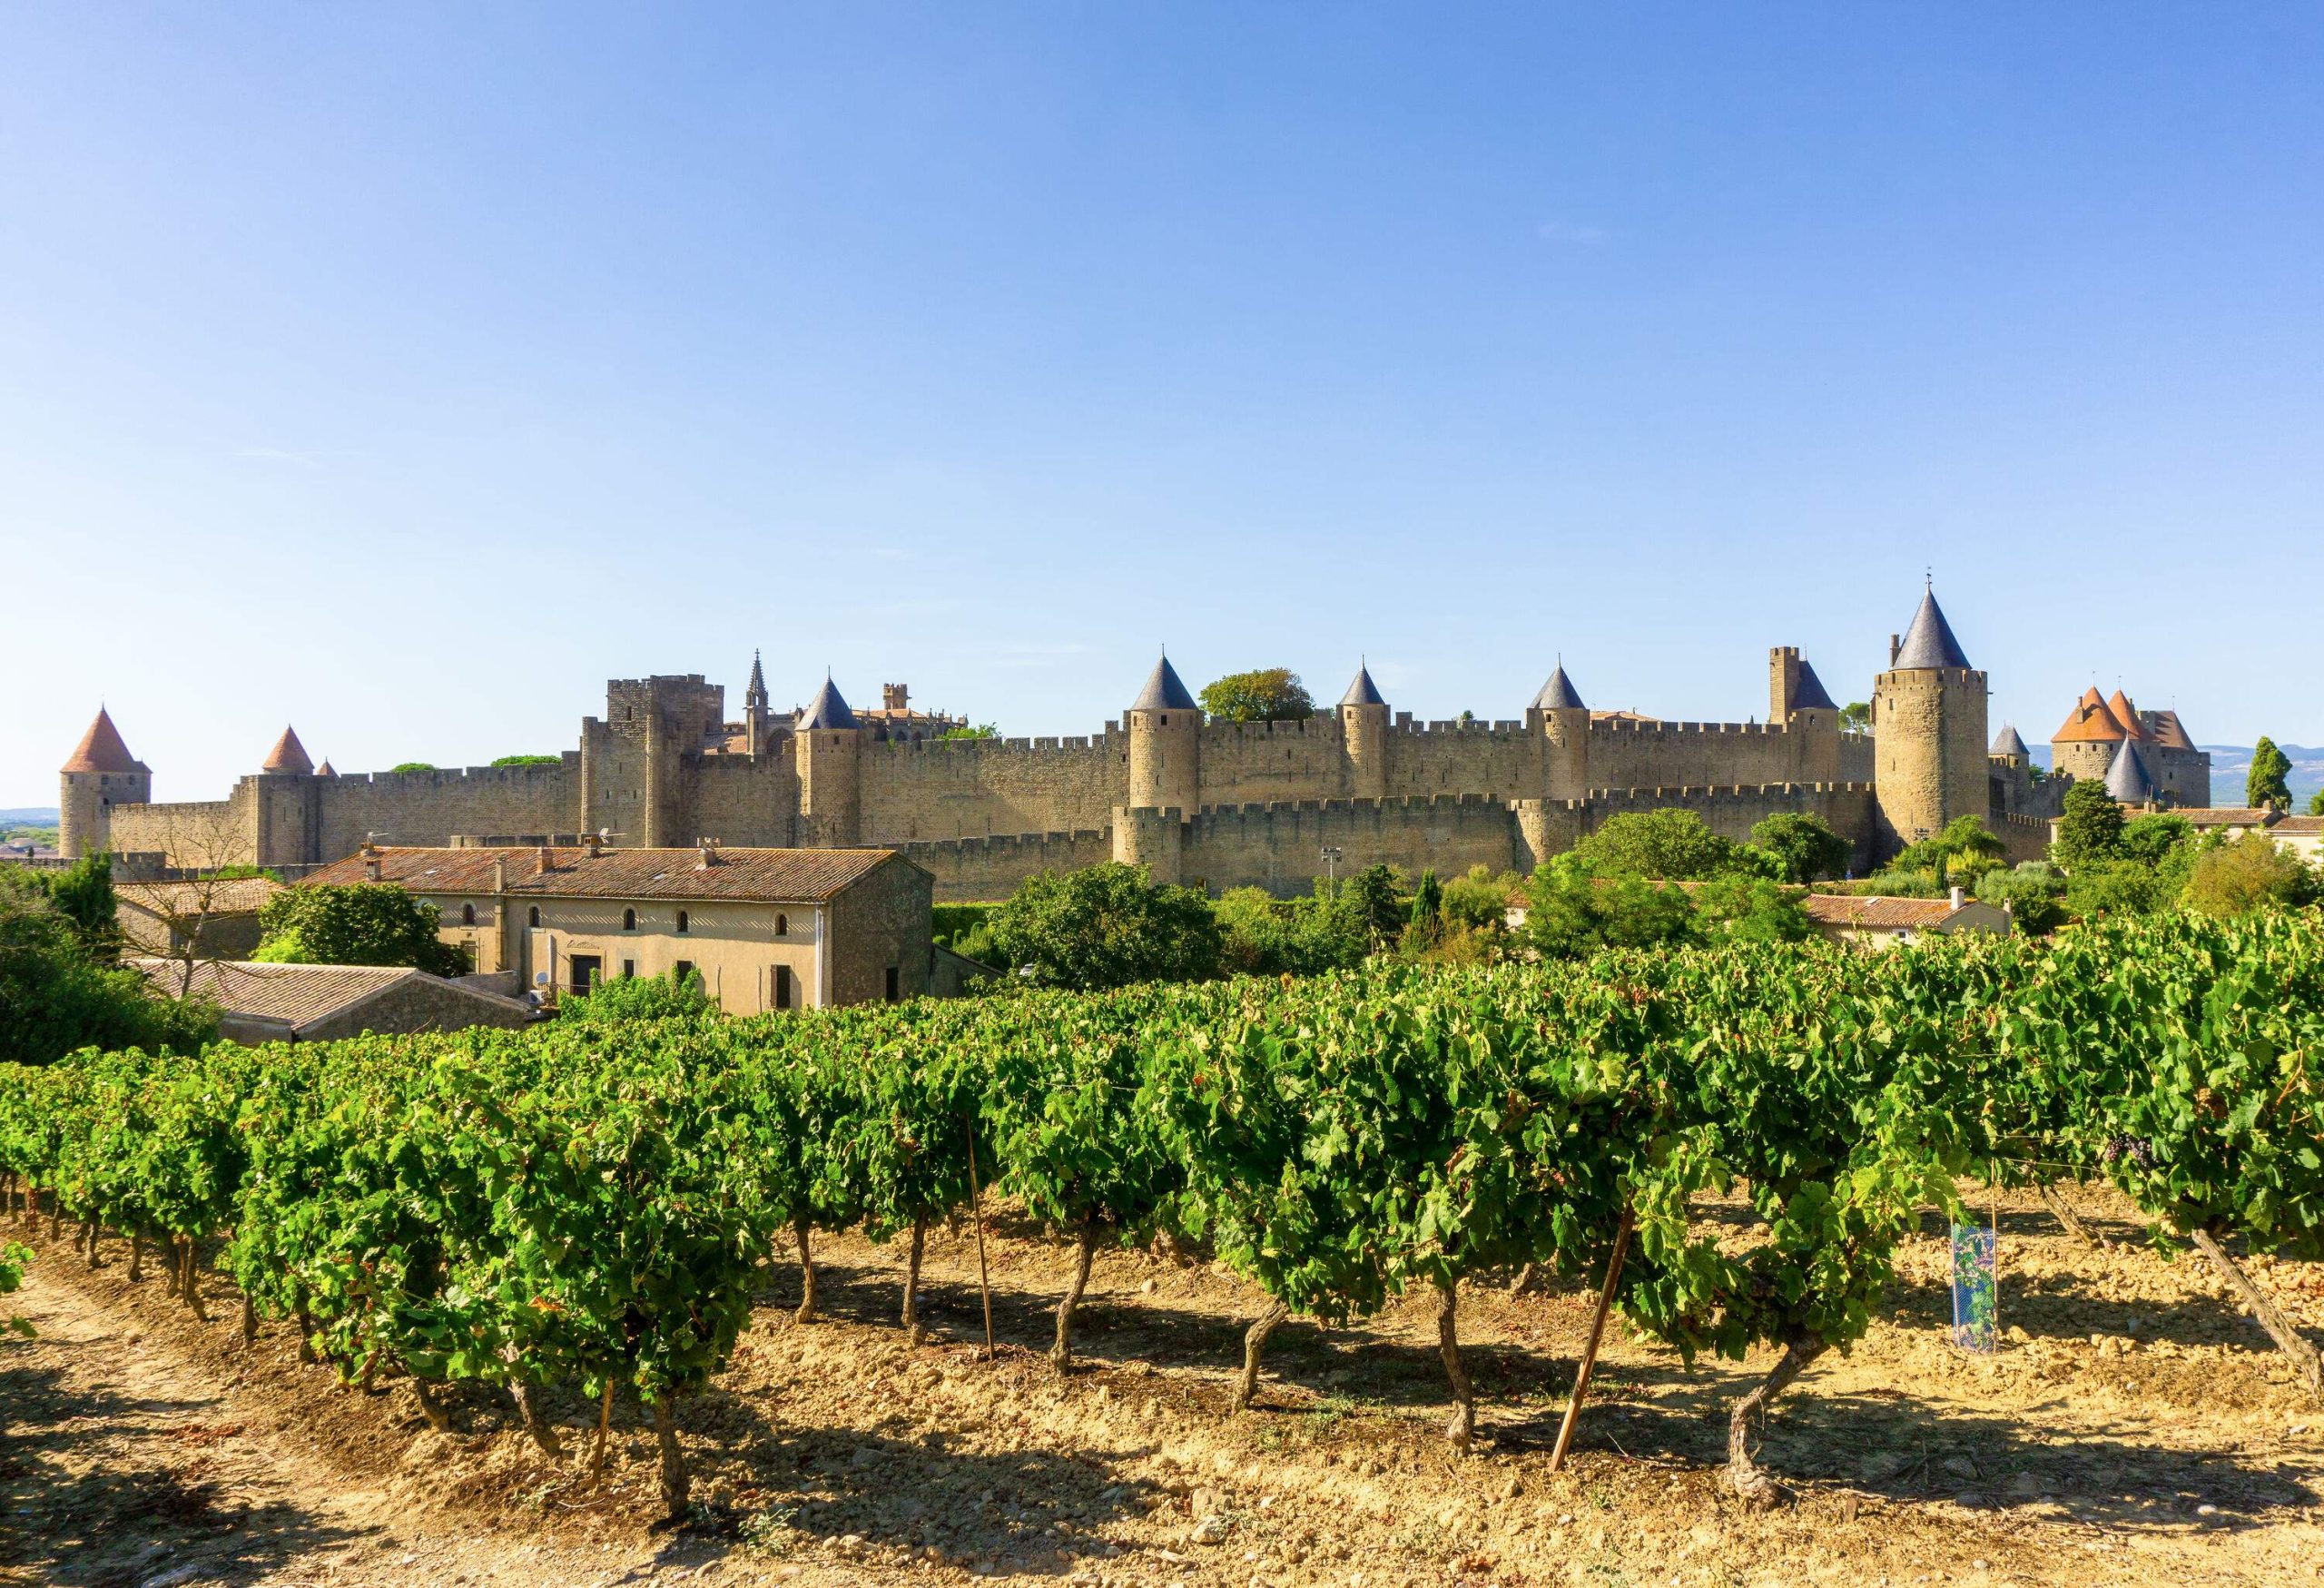 A castle's massive wall interspersed by towers surrounded by vineyards against the blue sky.